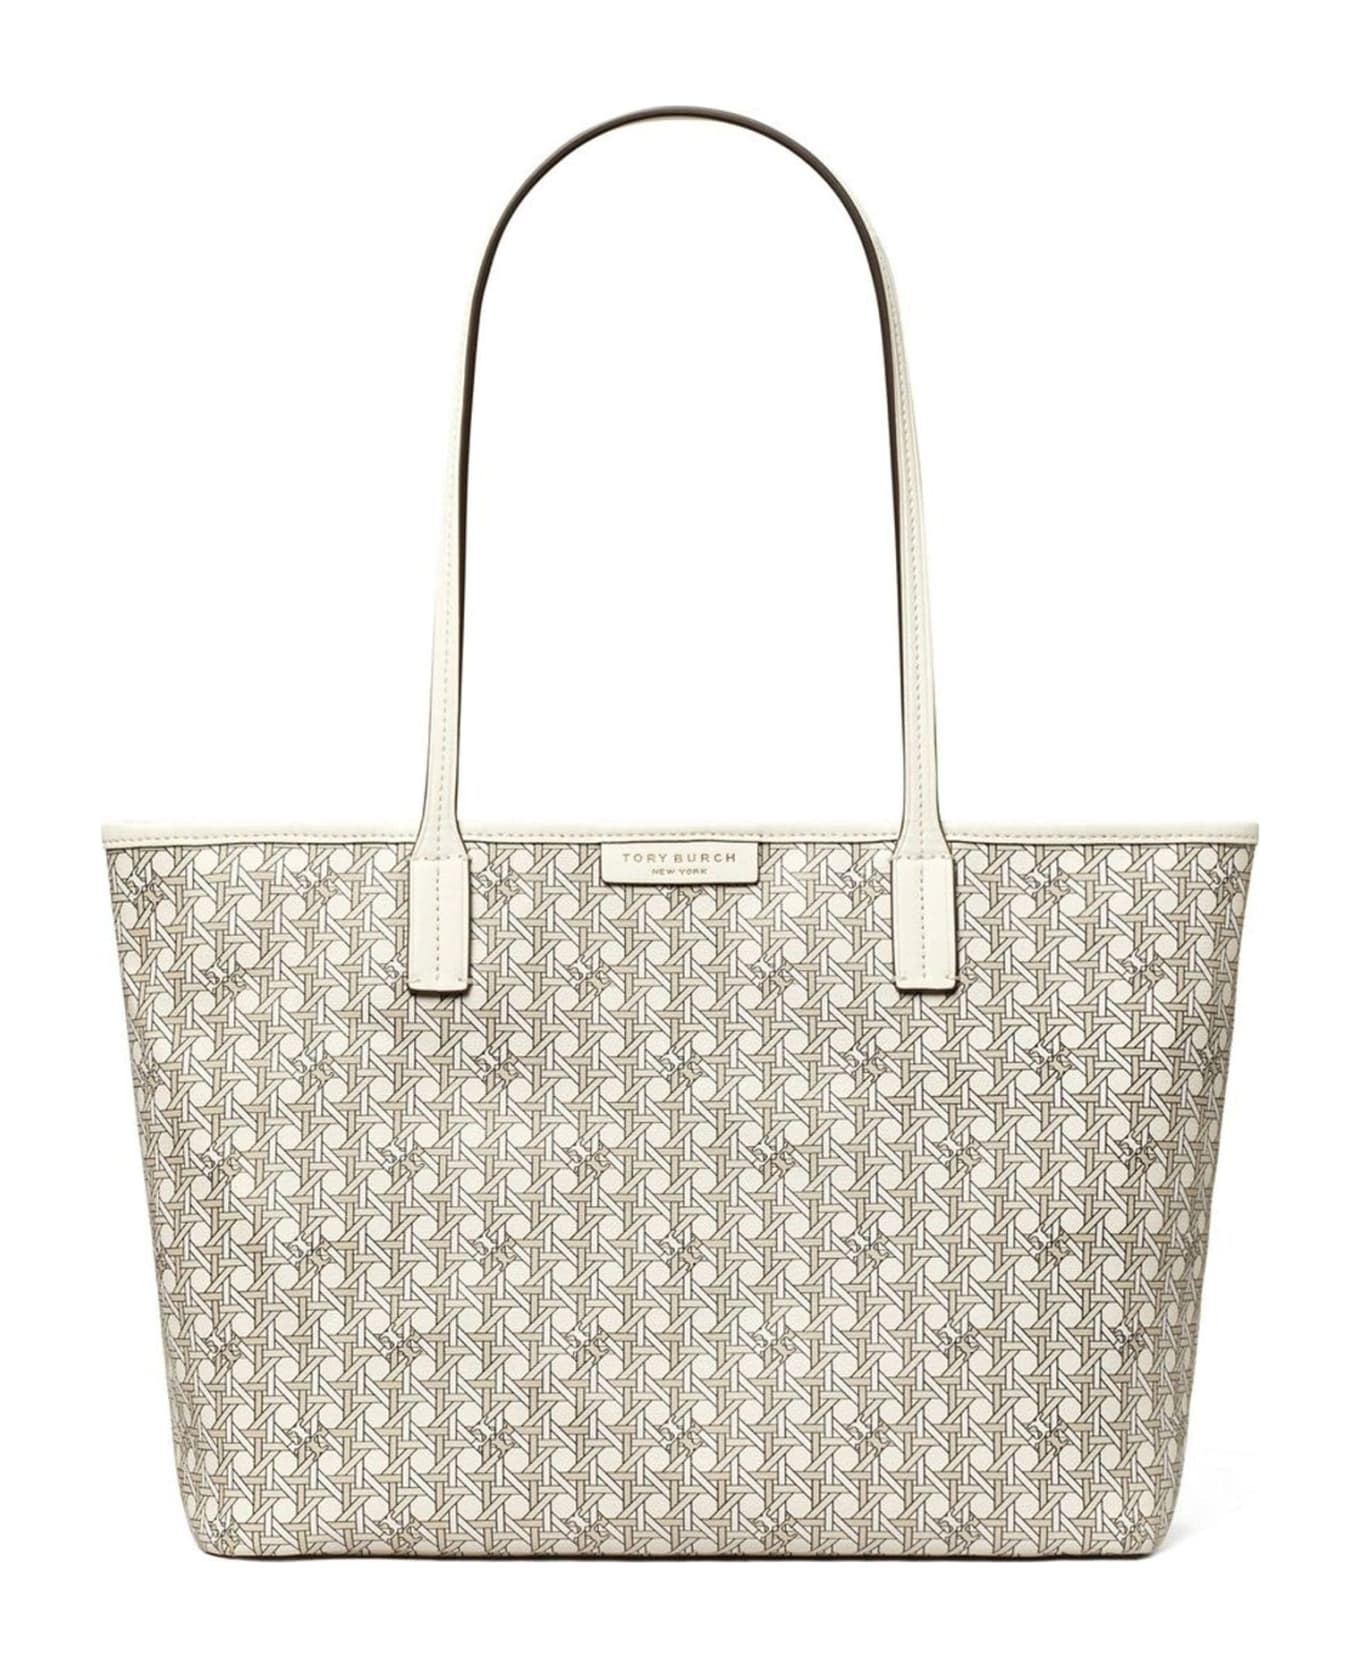 Tory Burch Printed Canvas Tote Bag - NEW IVORY